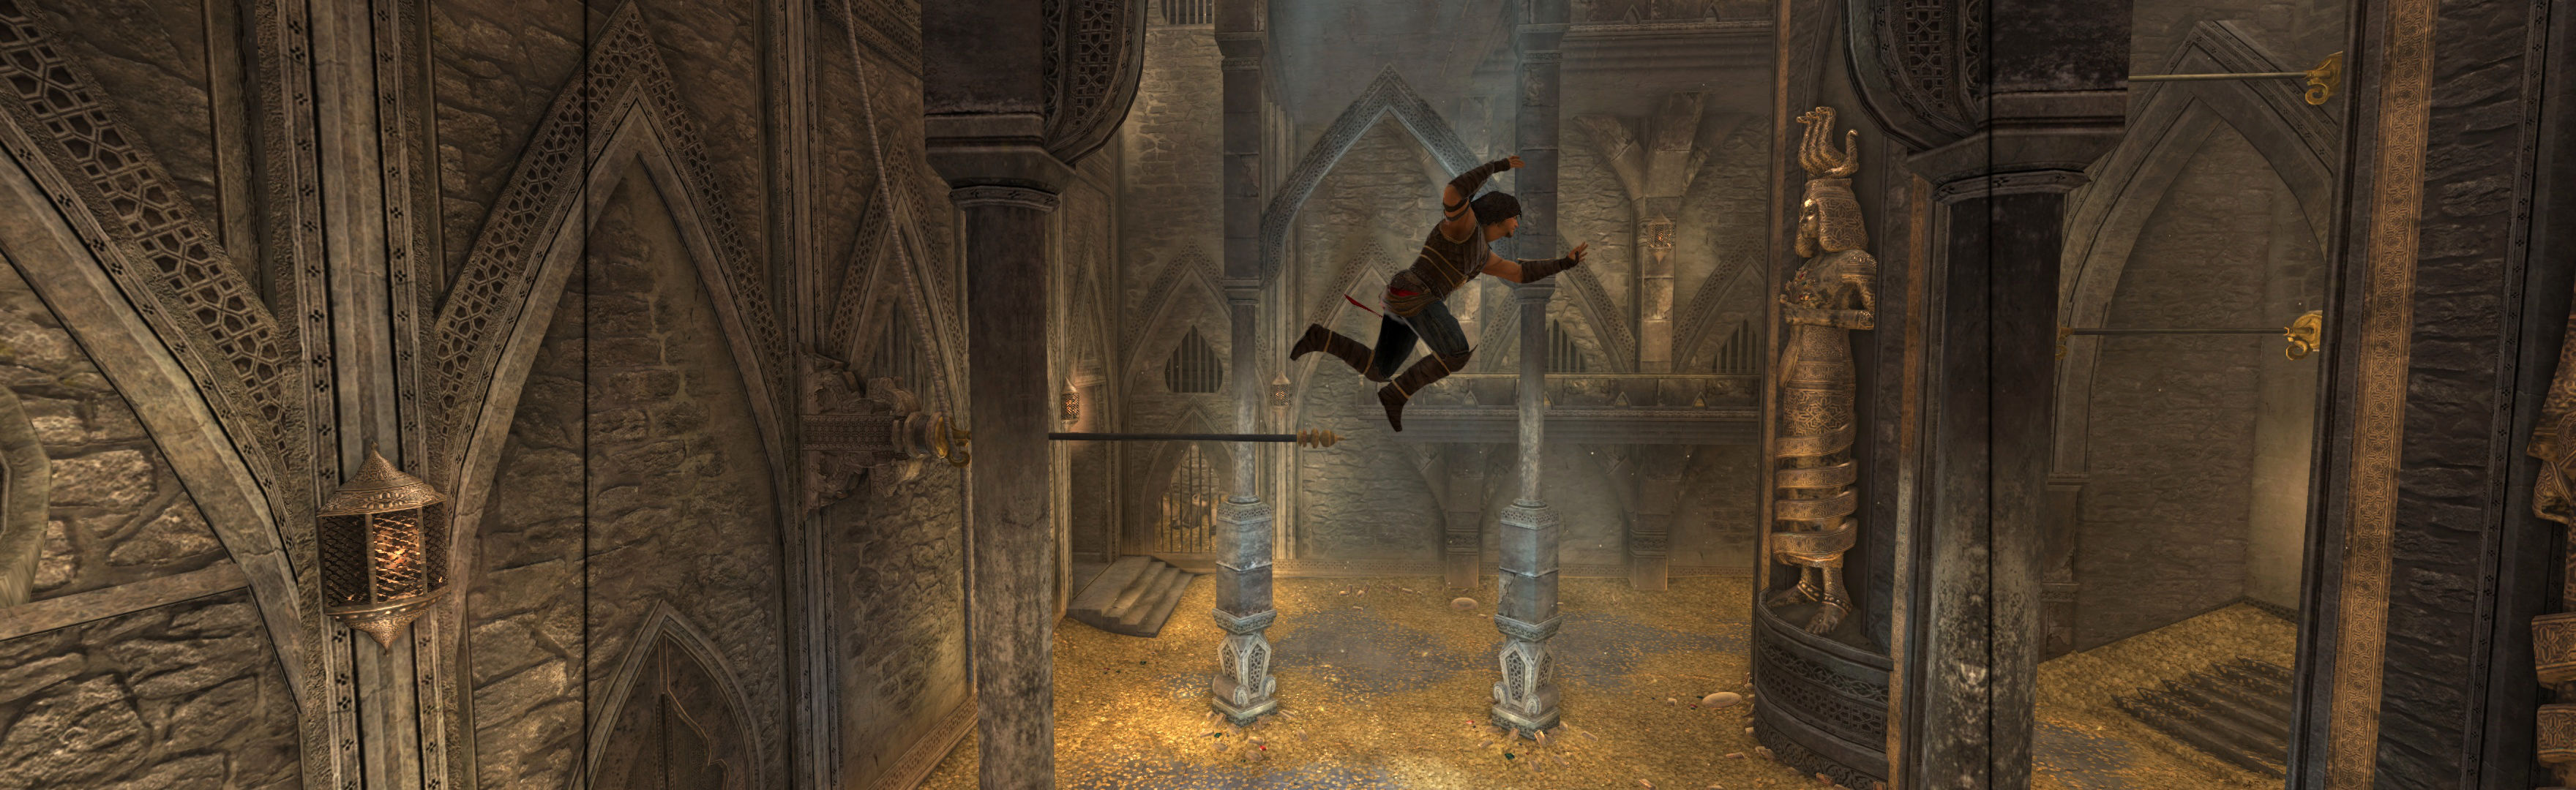 Prince of Persia - The Forgotten Sands Ubisoft Connect for PC